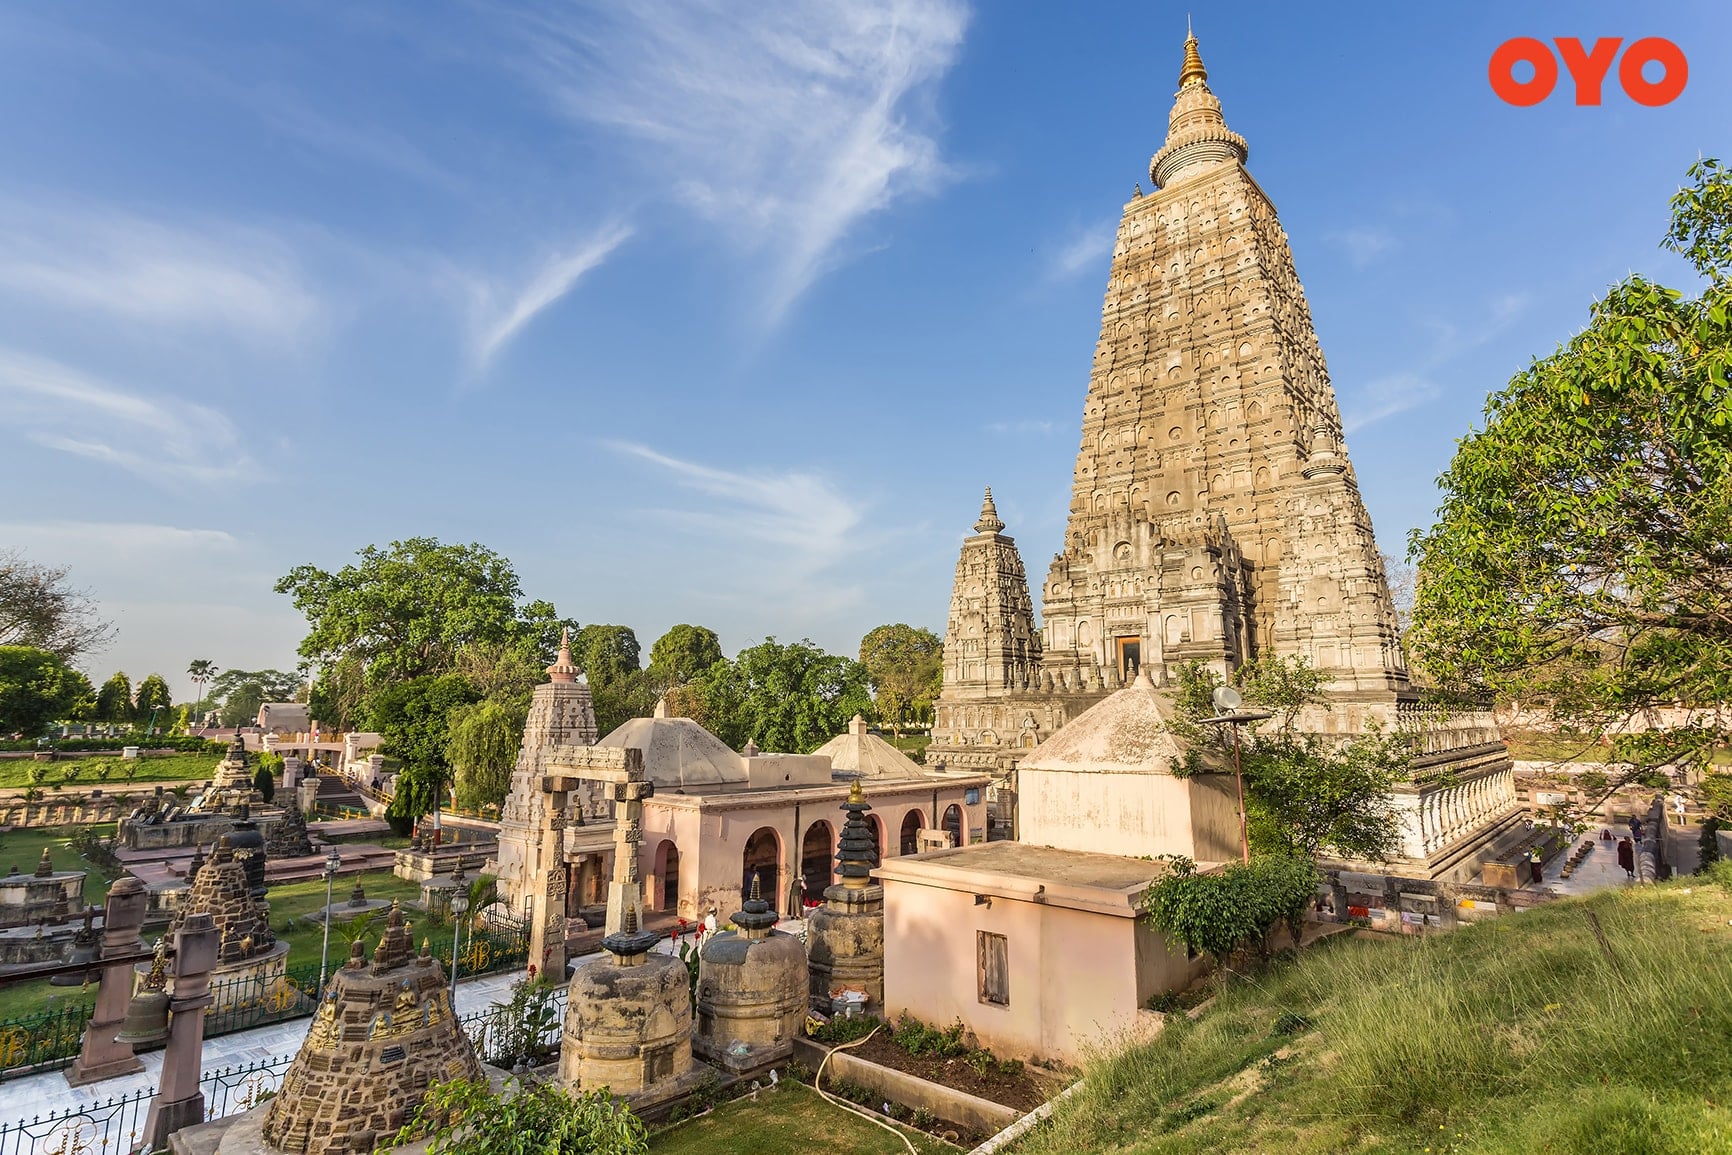 Mahabodhi Temple, Patna- One of the most famous temple of India